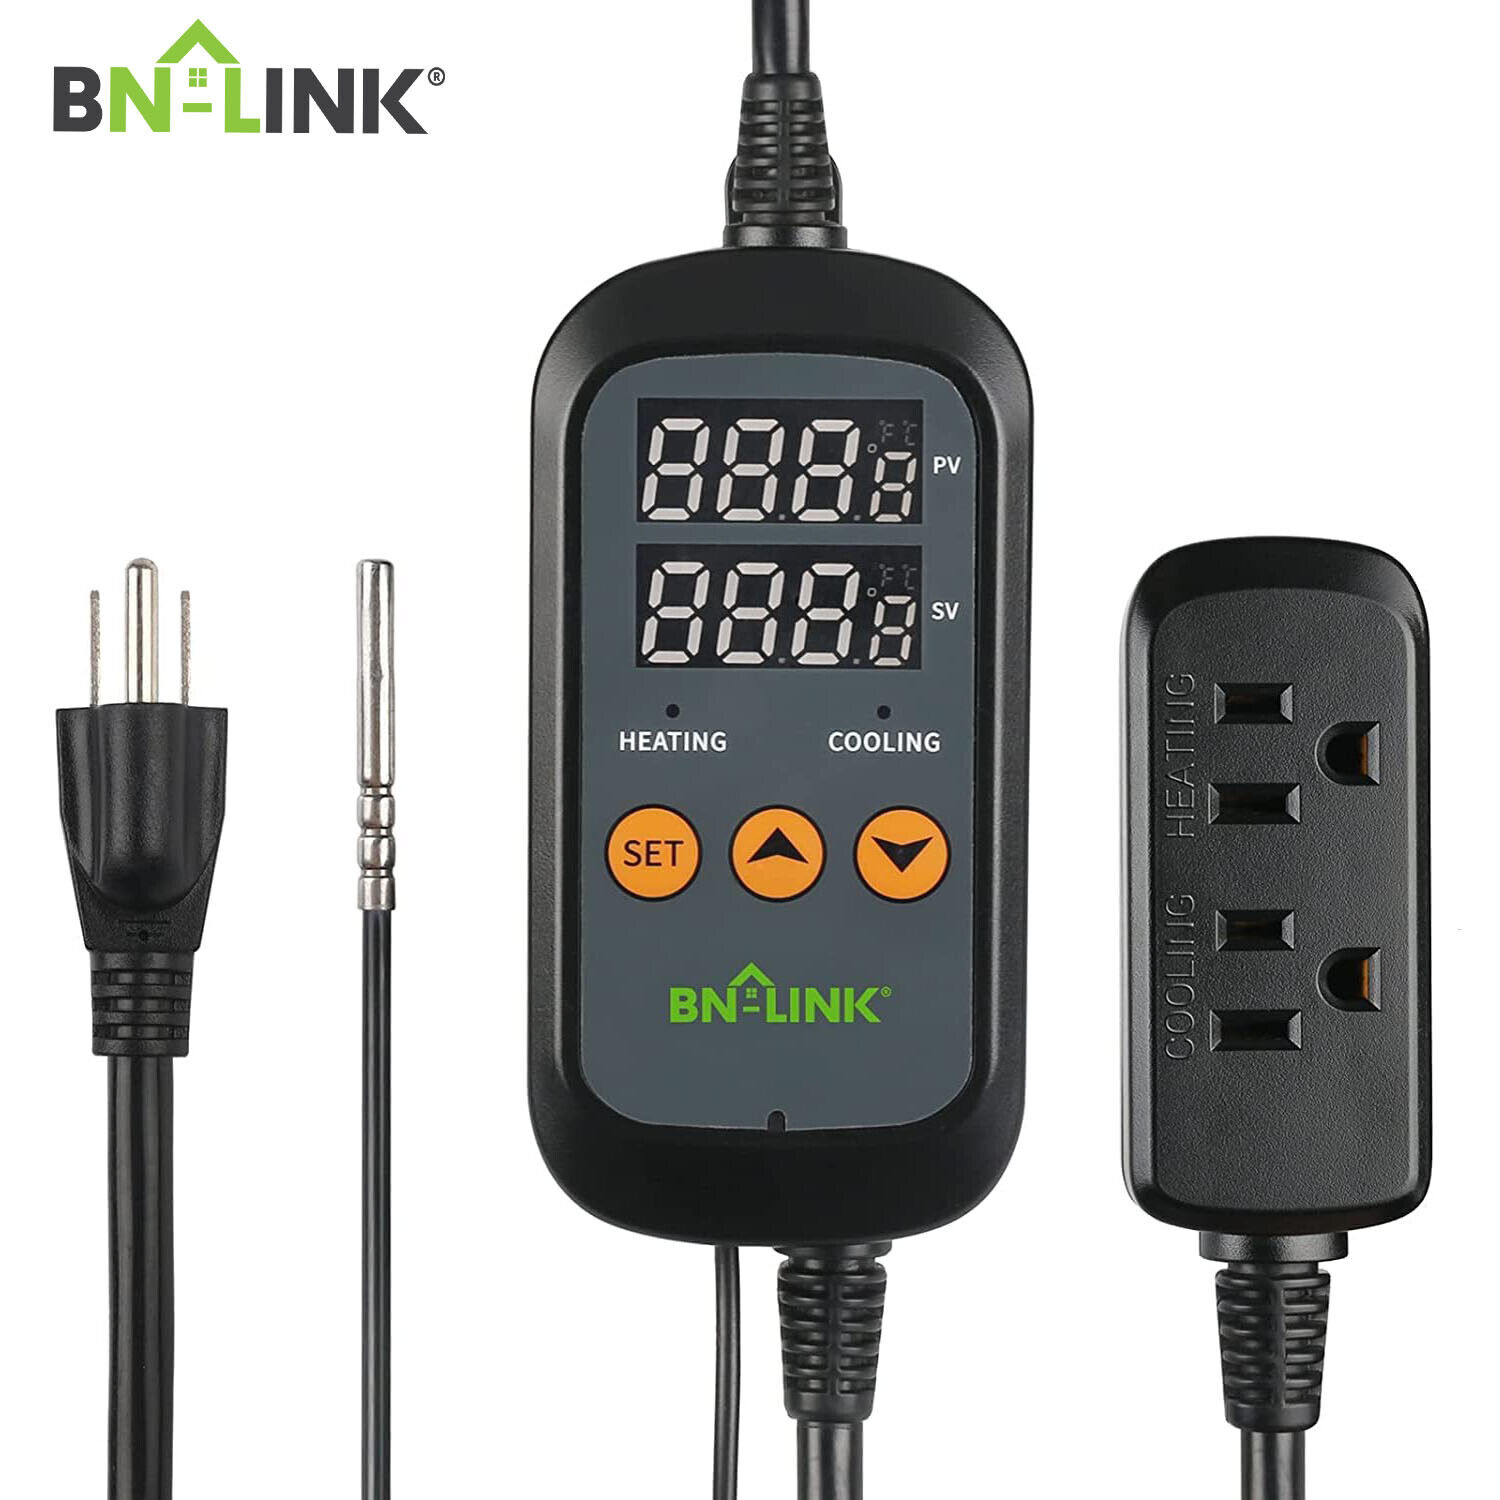 BN-LINK Digital Temperature Controller Heating Cooling 2-Stage Outlet Thermostat